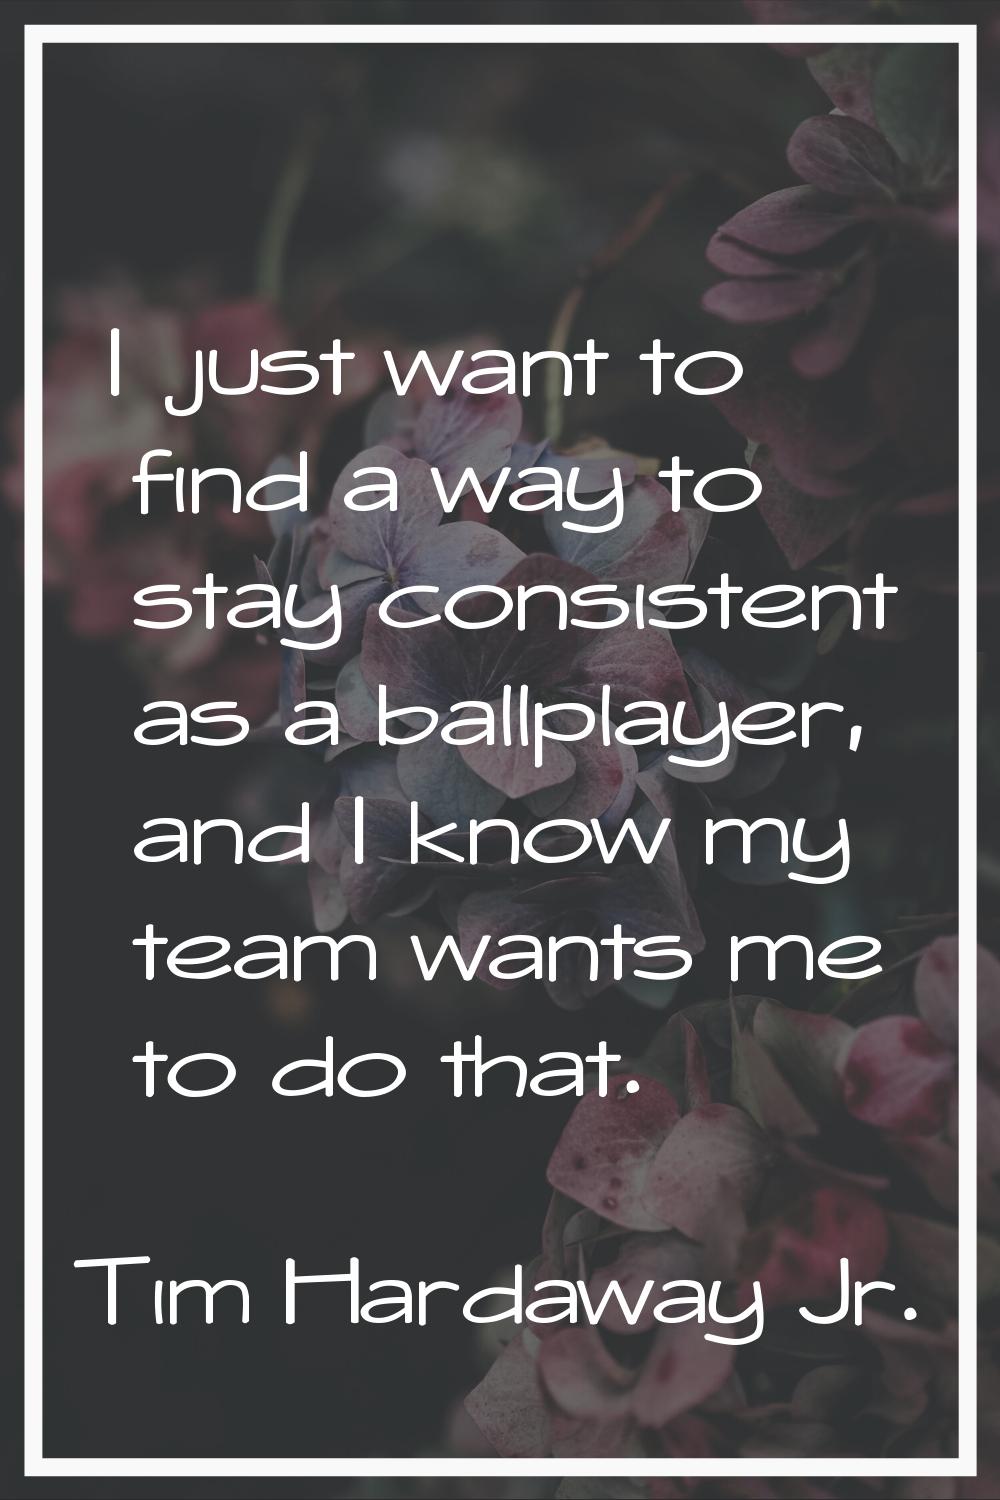 I just want to find a way to stay consistent as a ballplayer, and I know my team wants me to do tha